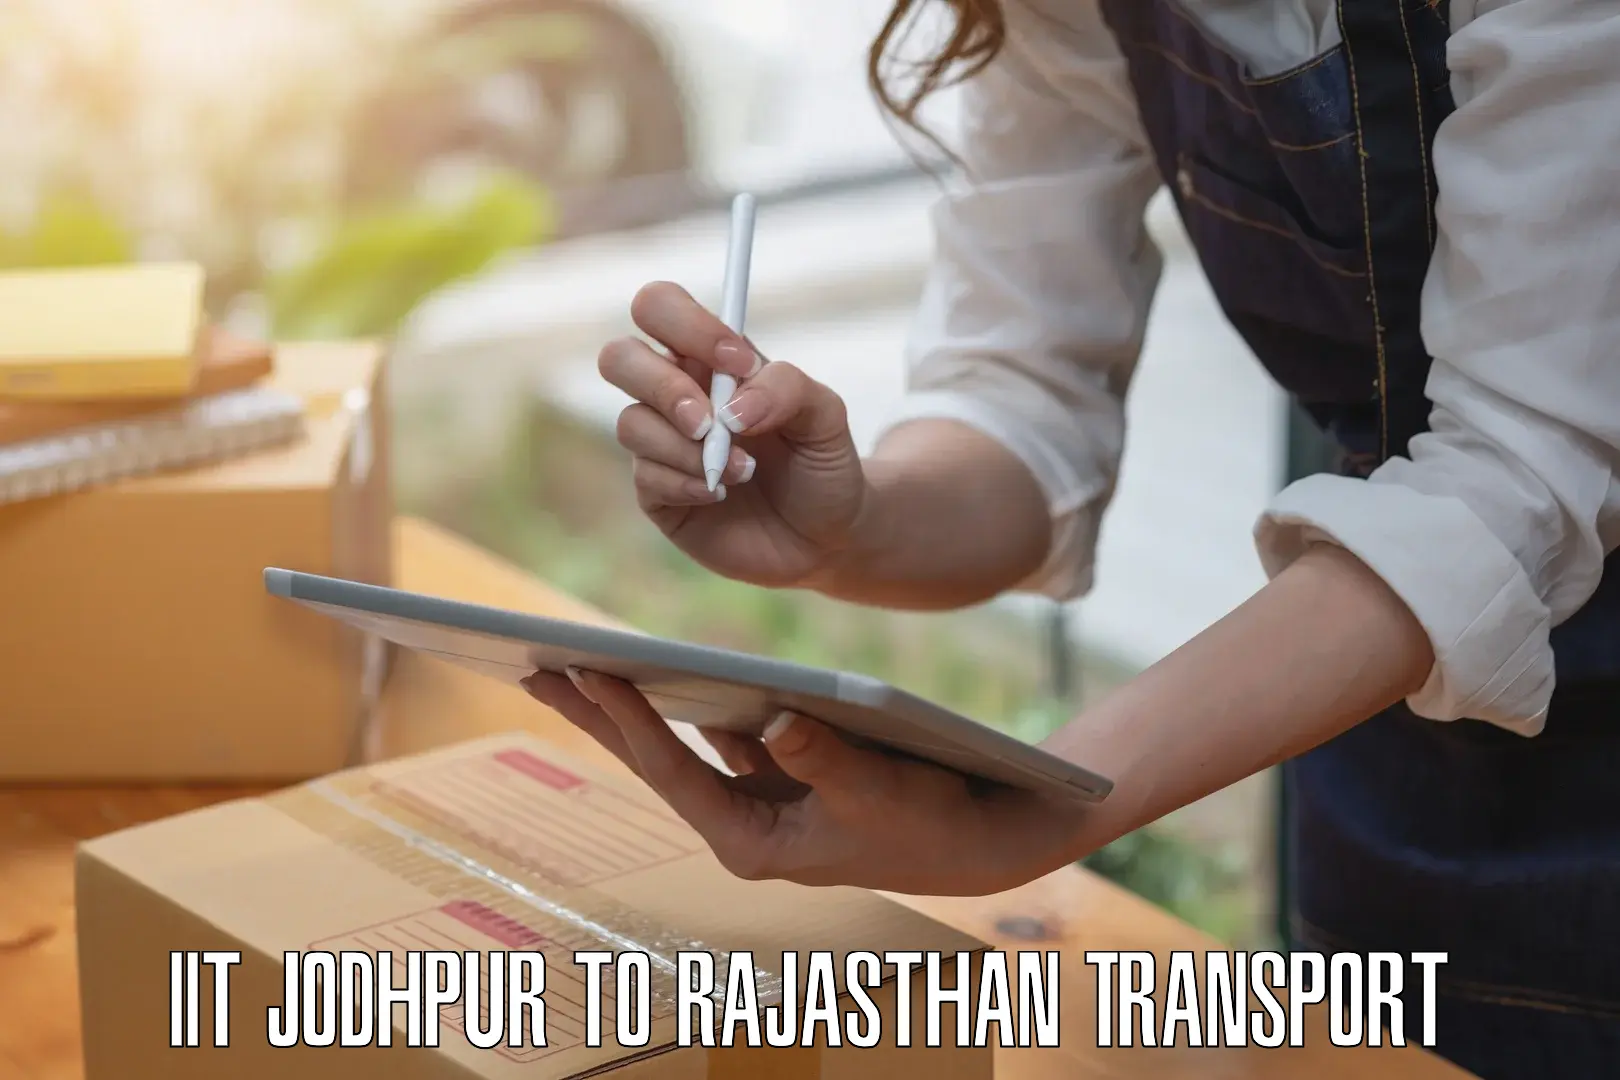 Transport bike from one state to another IIT Jodhpur to Pratapgarh Rajasthan